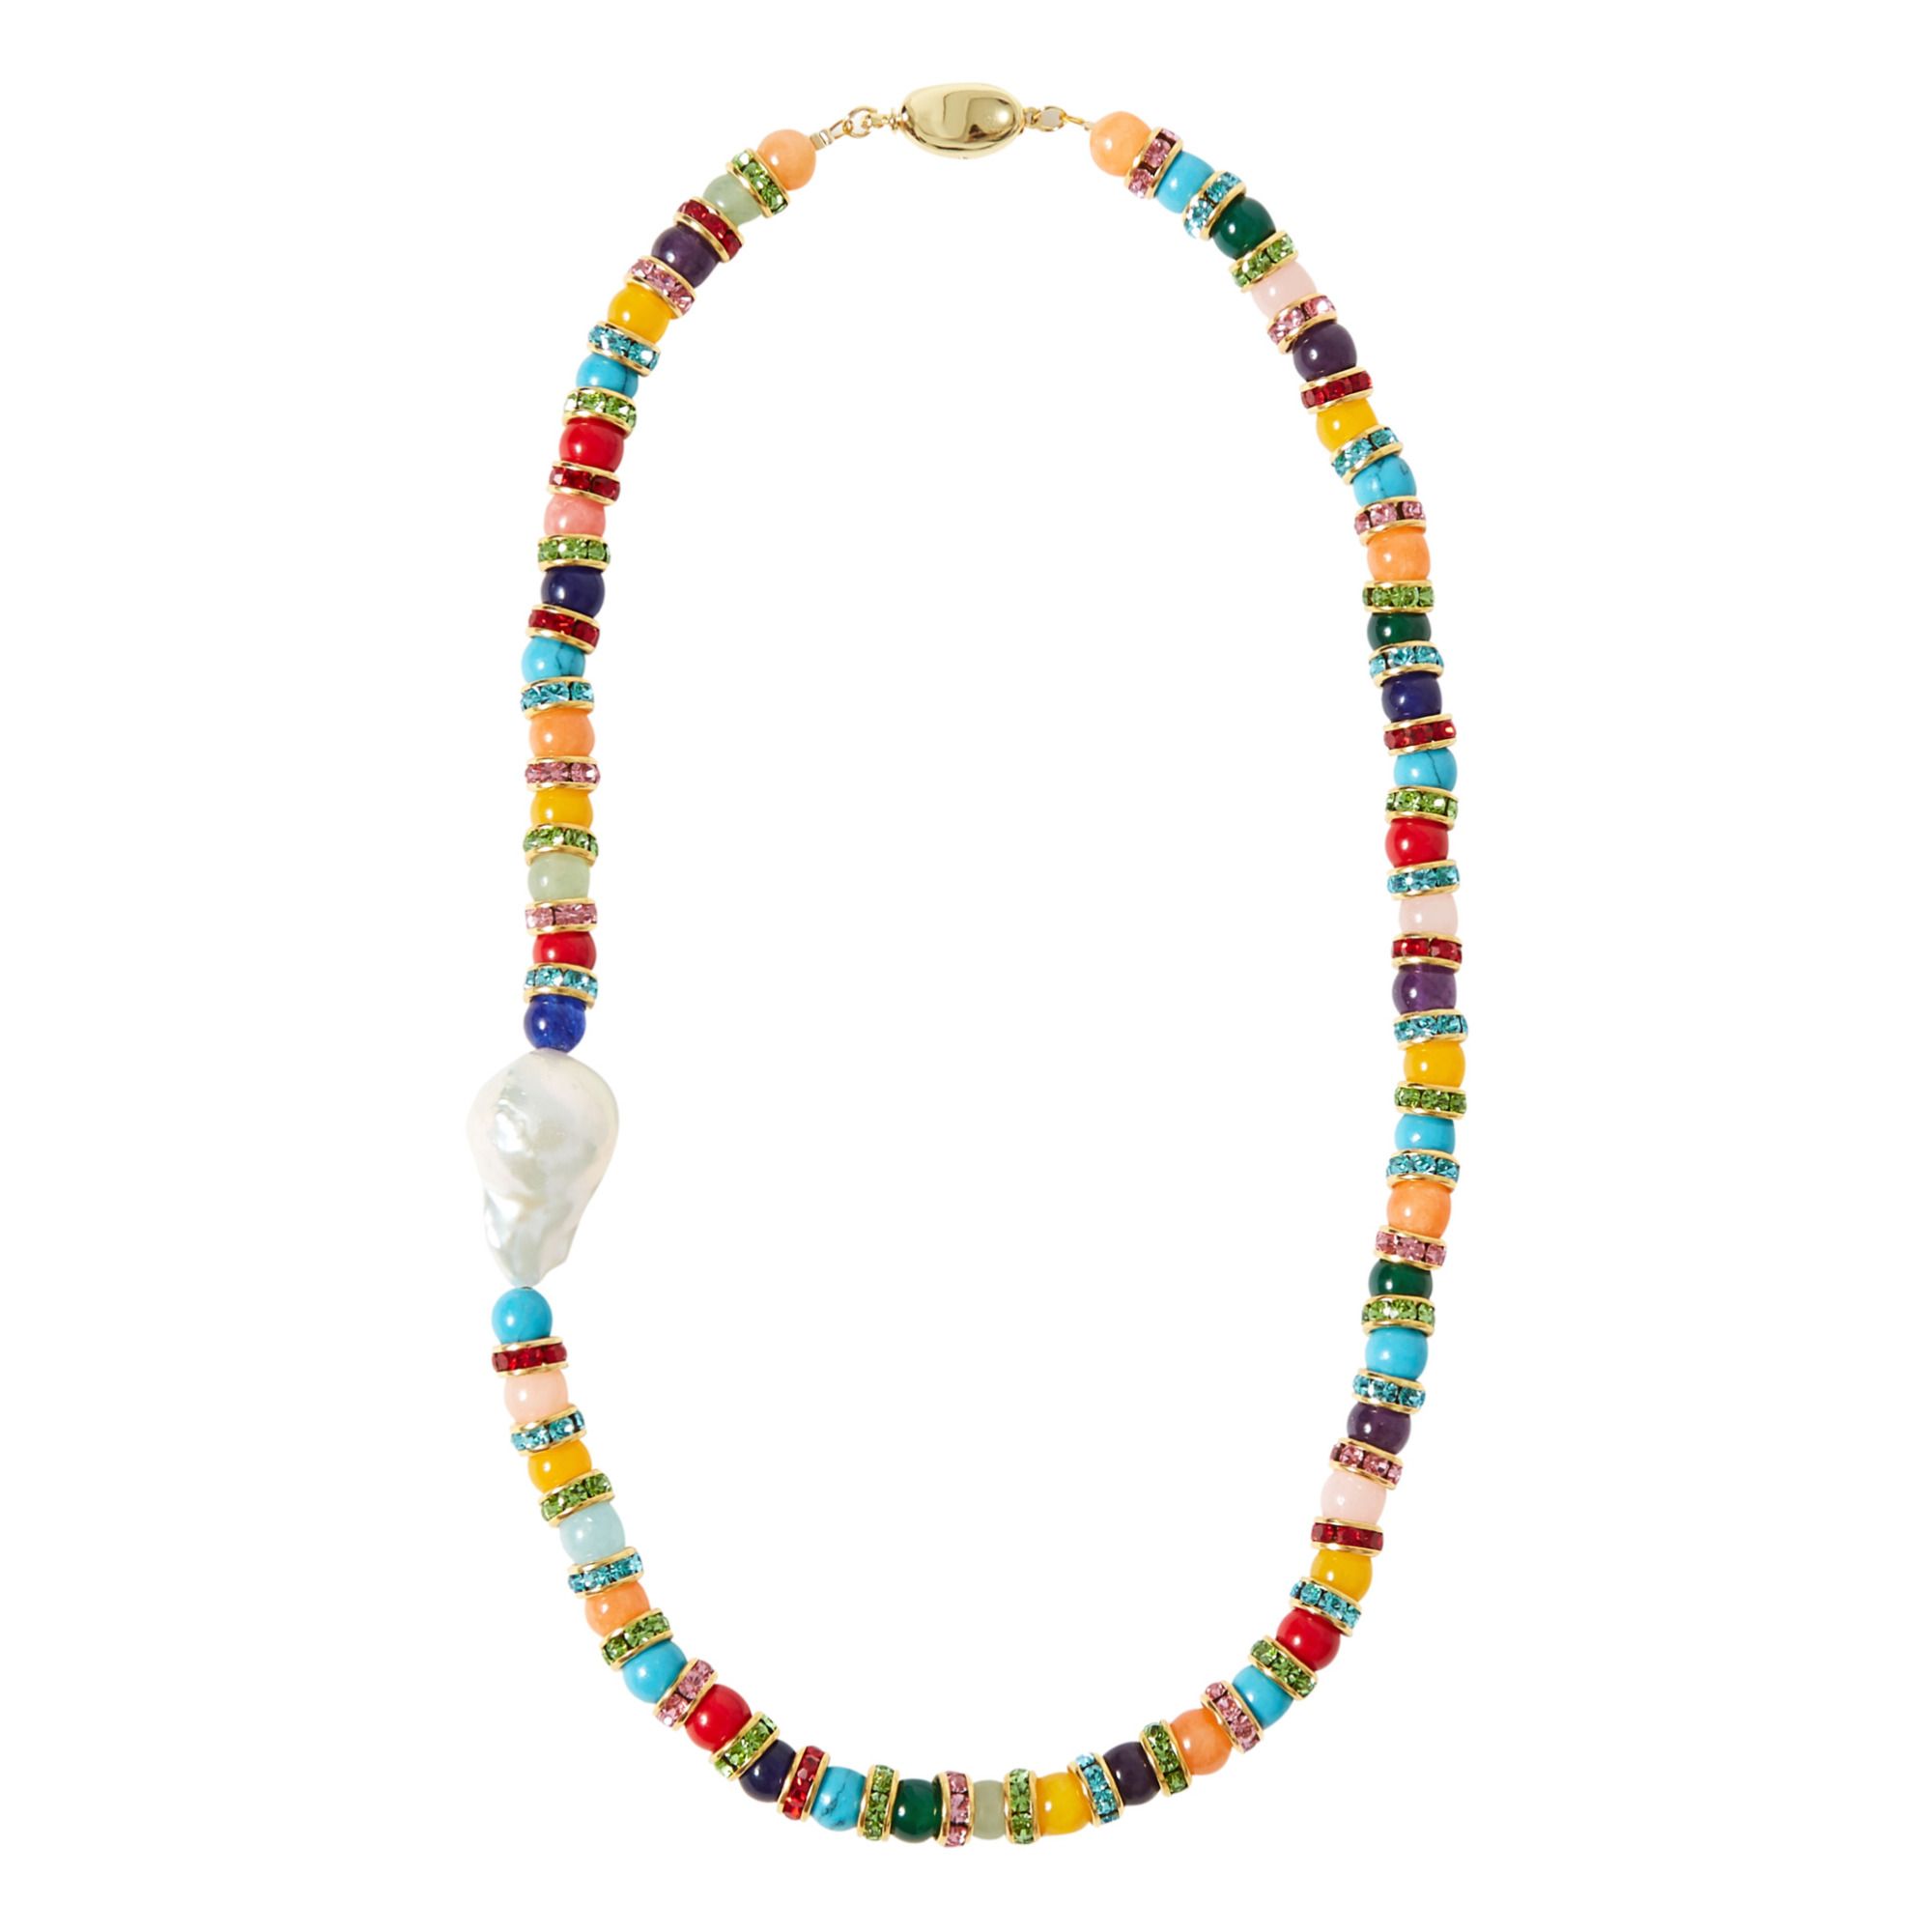 Timeless Pearly - Collier Perle Naturelle et Perle Multiples - Femme - Multicolore